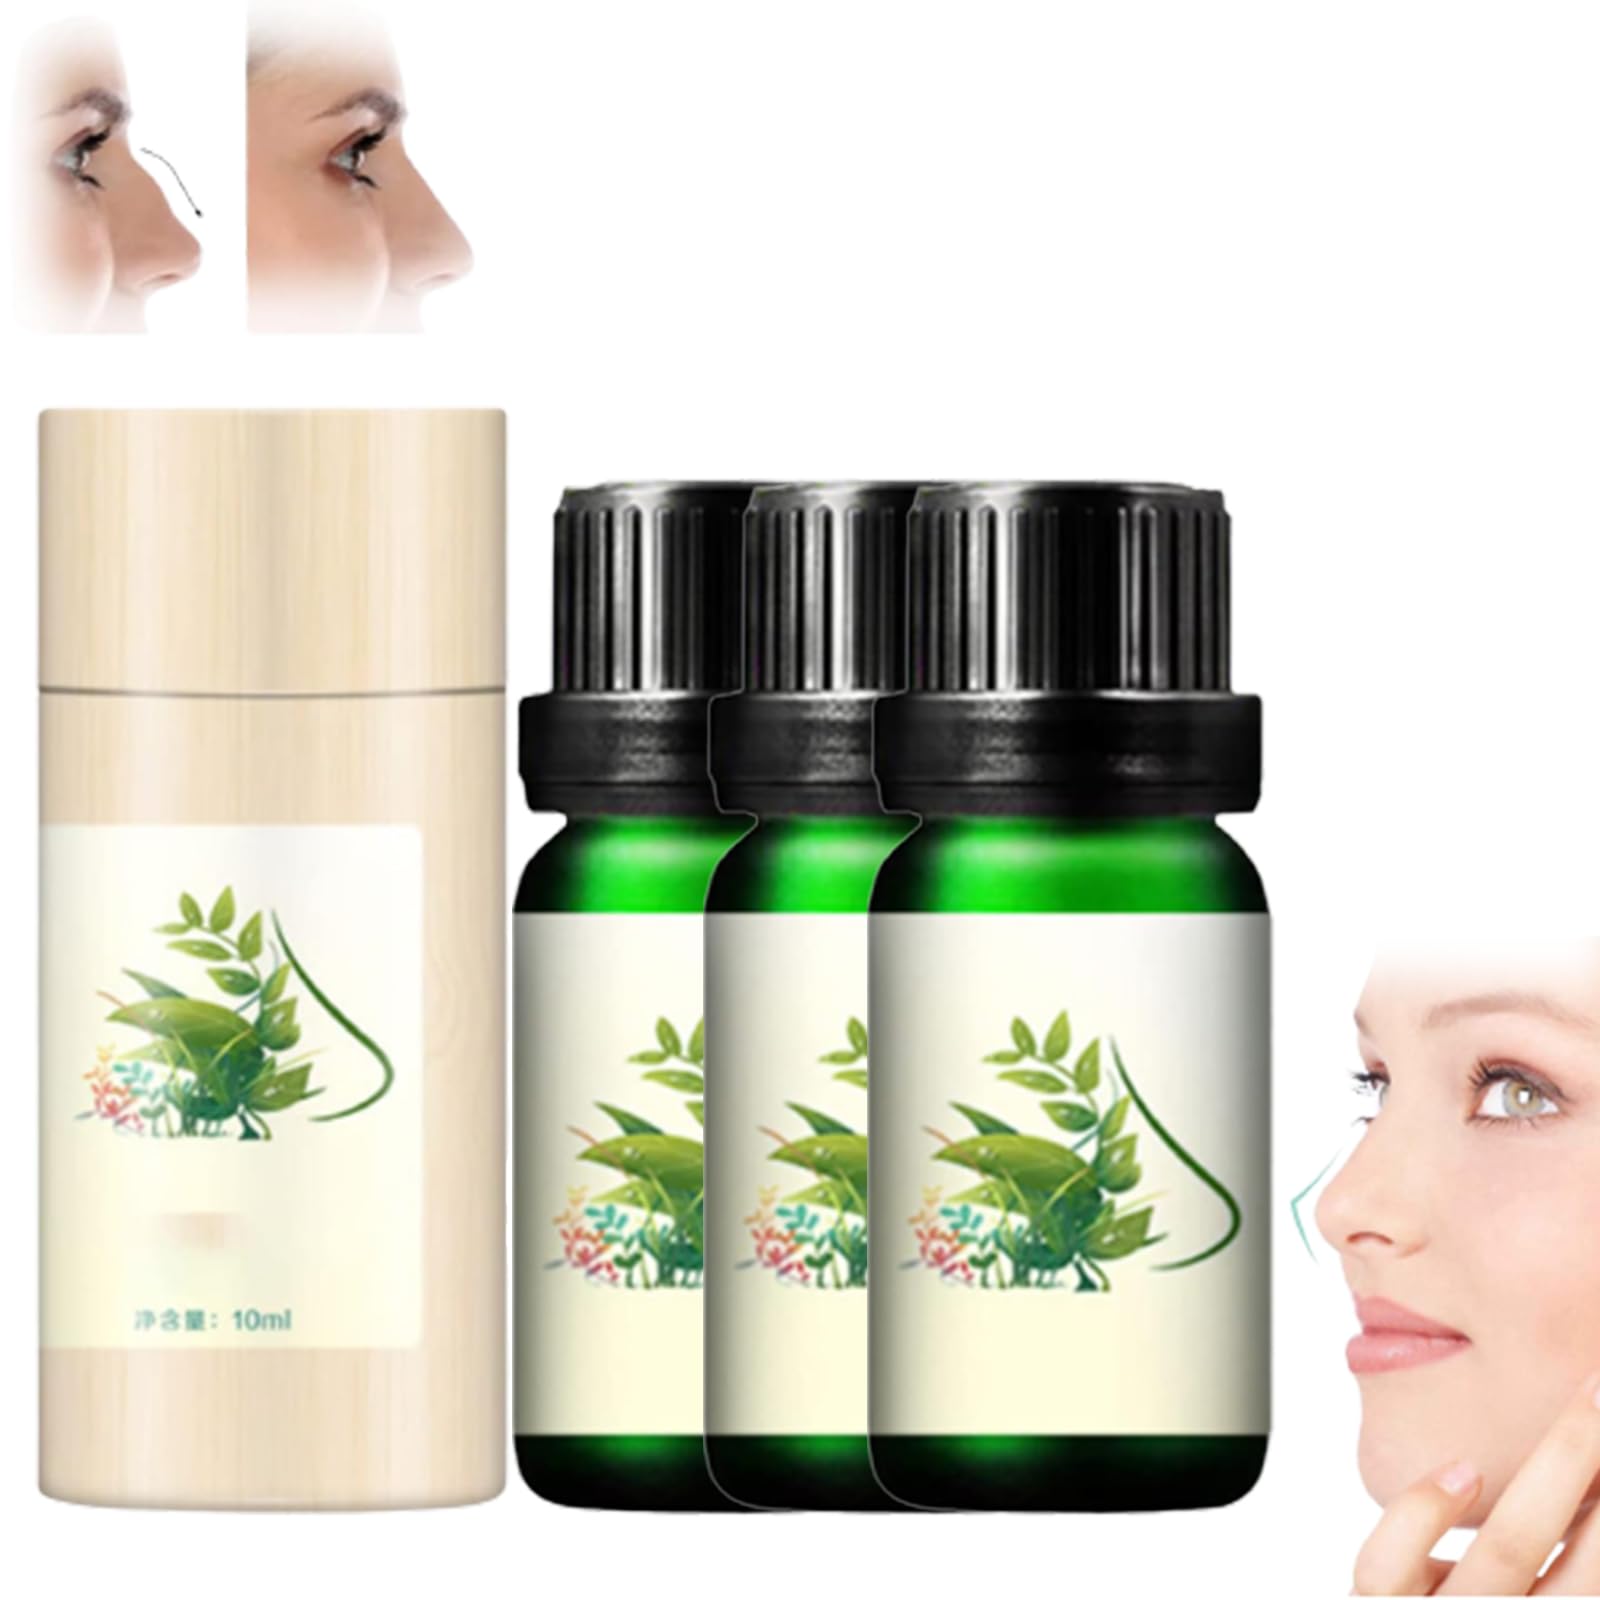 Alkyne Sci-effect Nose Lift Shaping Oil Nose Up Heighten Rhinoplasty  Essential Oil Nasal Bone Remodeling Serum for Nose Heighten&Reshaping (3pcs)